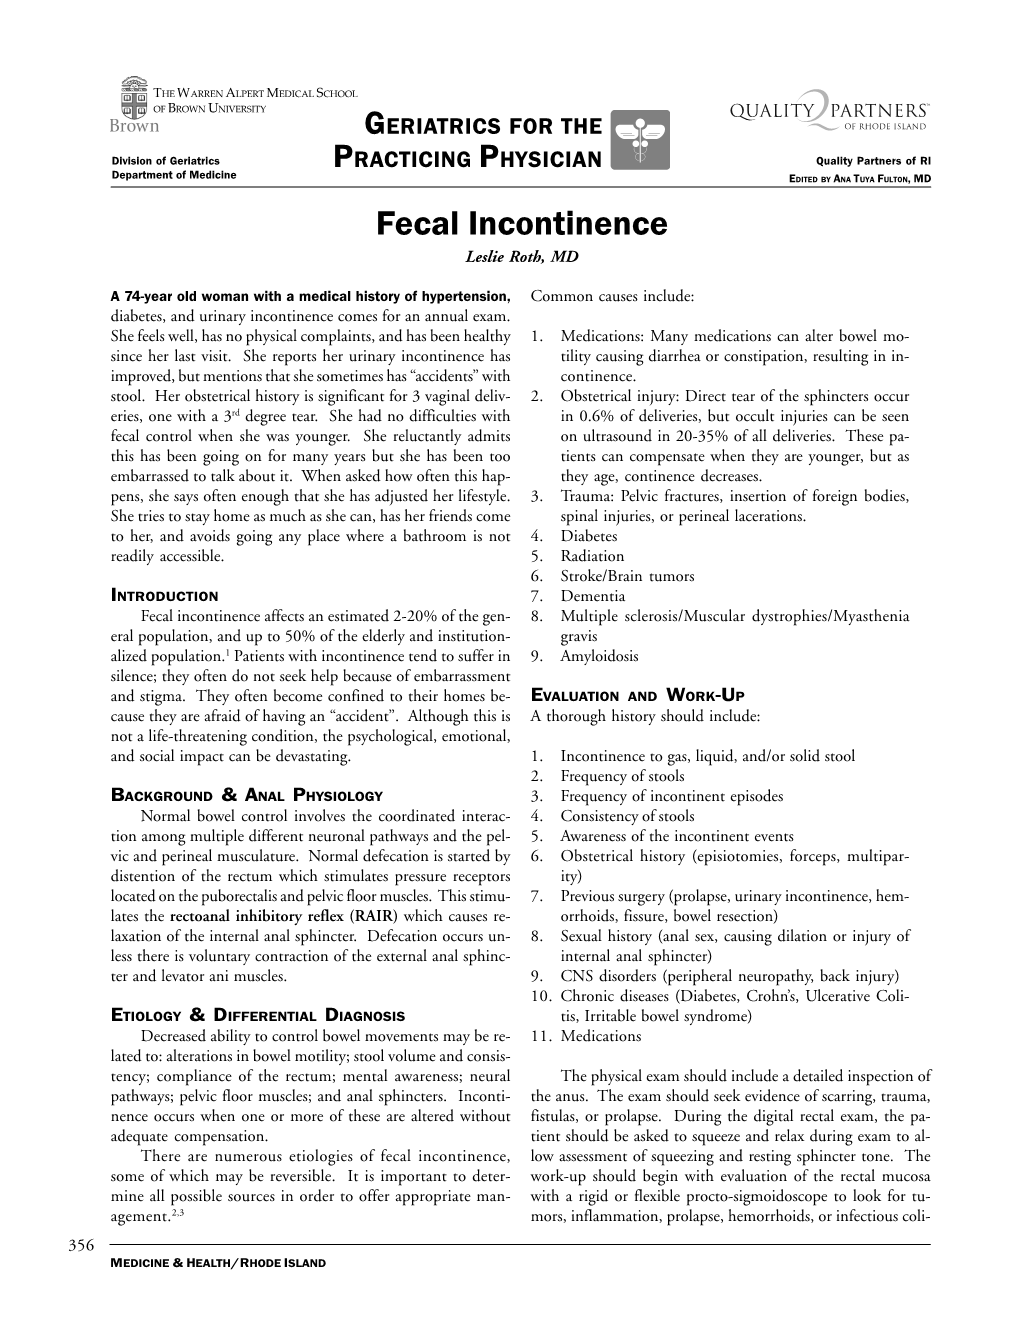 Fecal Incontinence Leslie Roth, MD